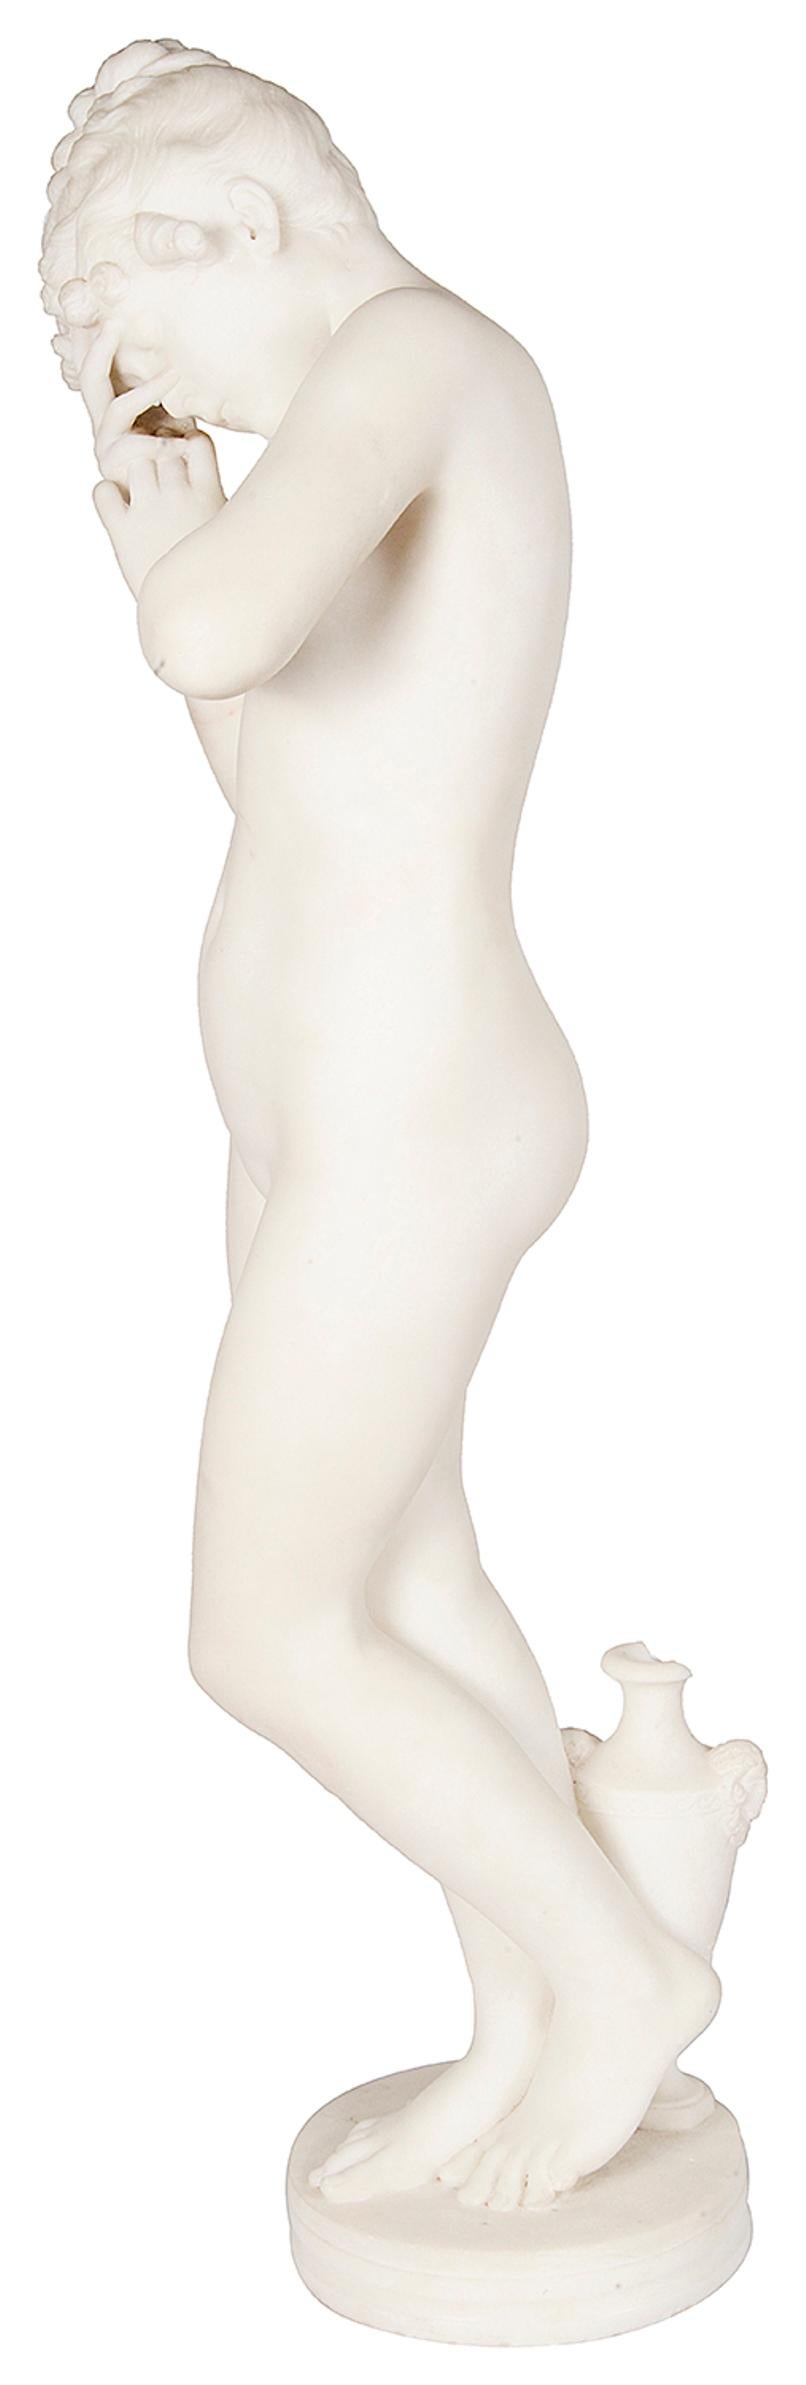 Carrara Marble Classical 19th Century Carrera Marble Nude For Sale